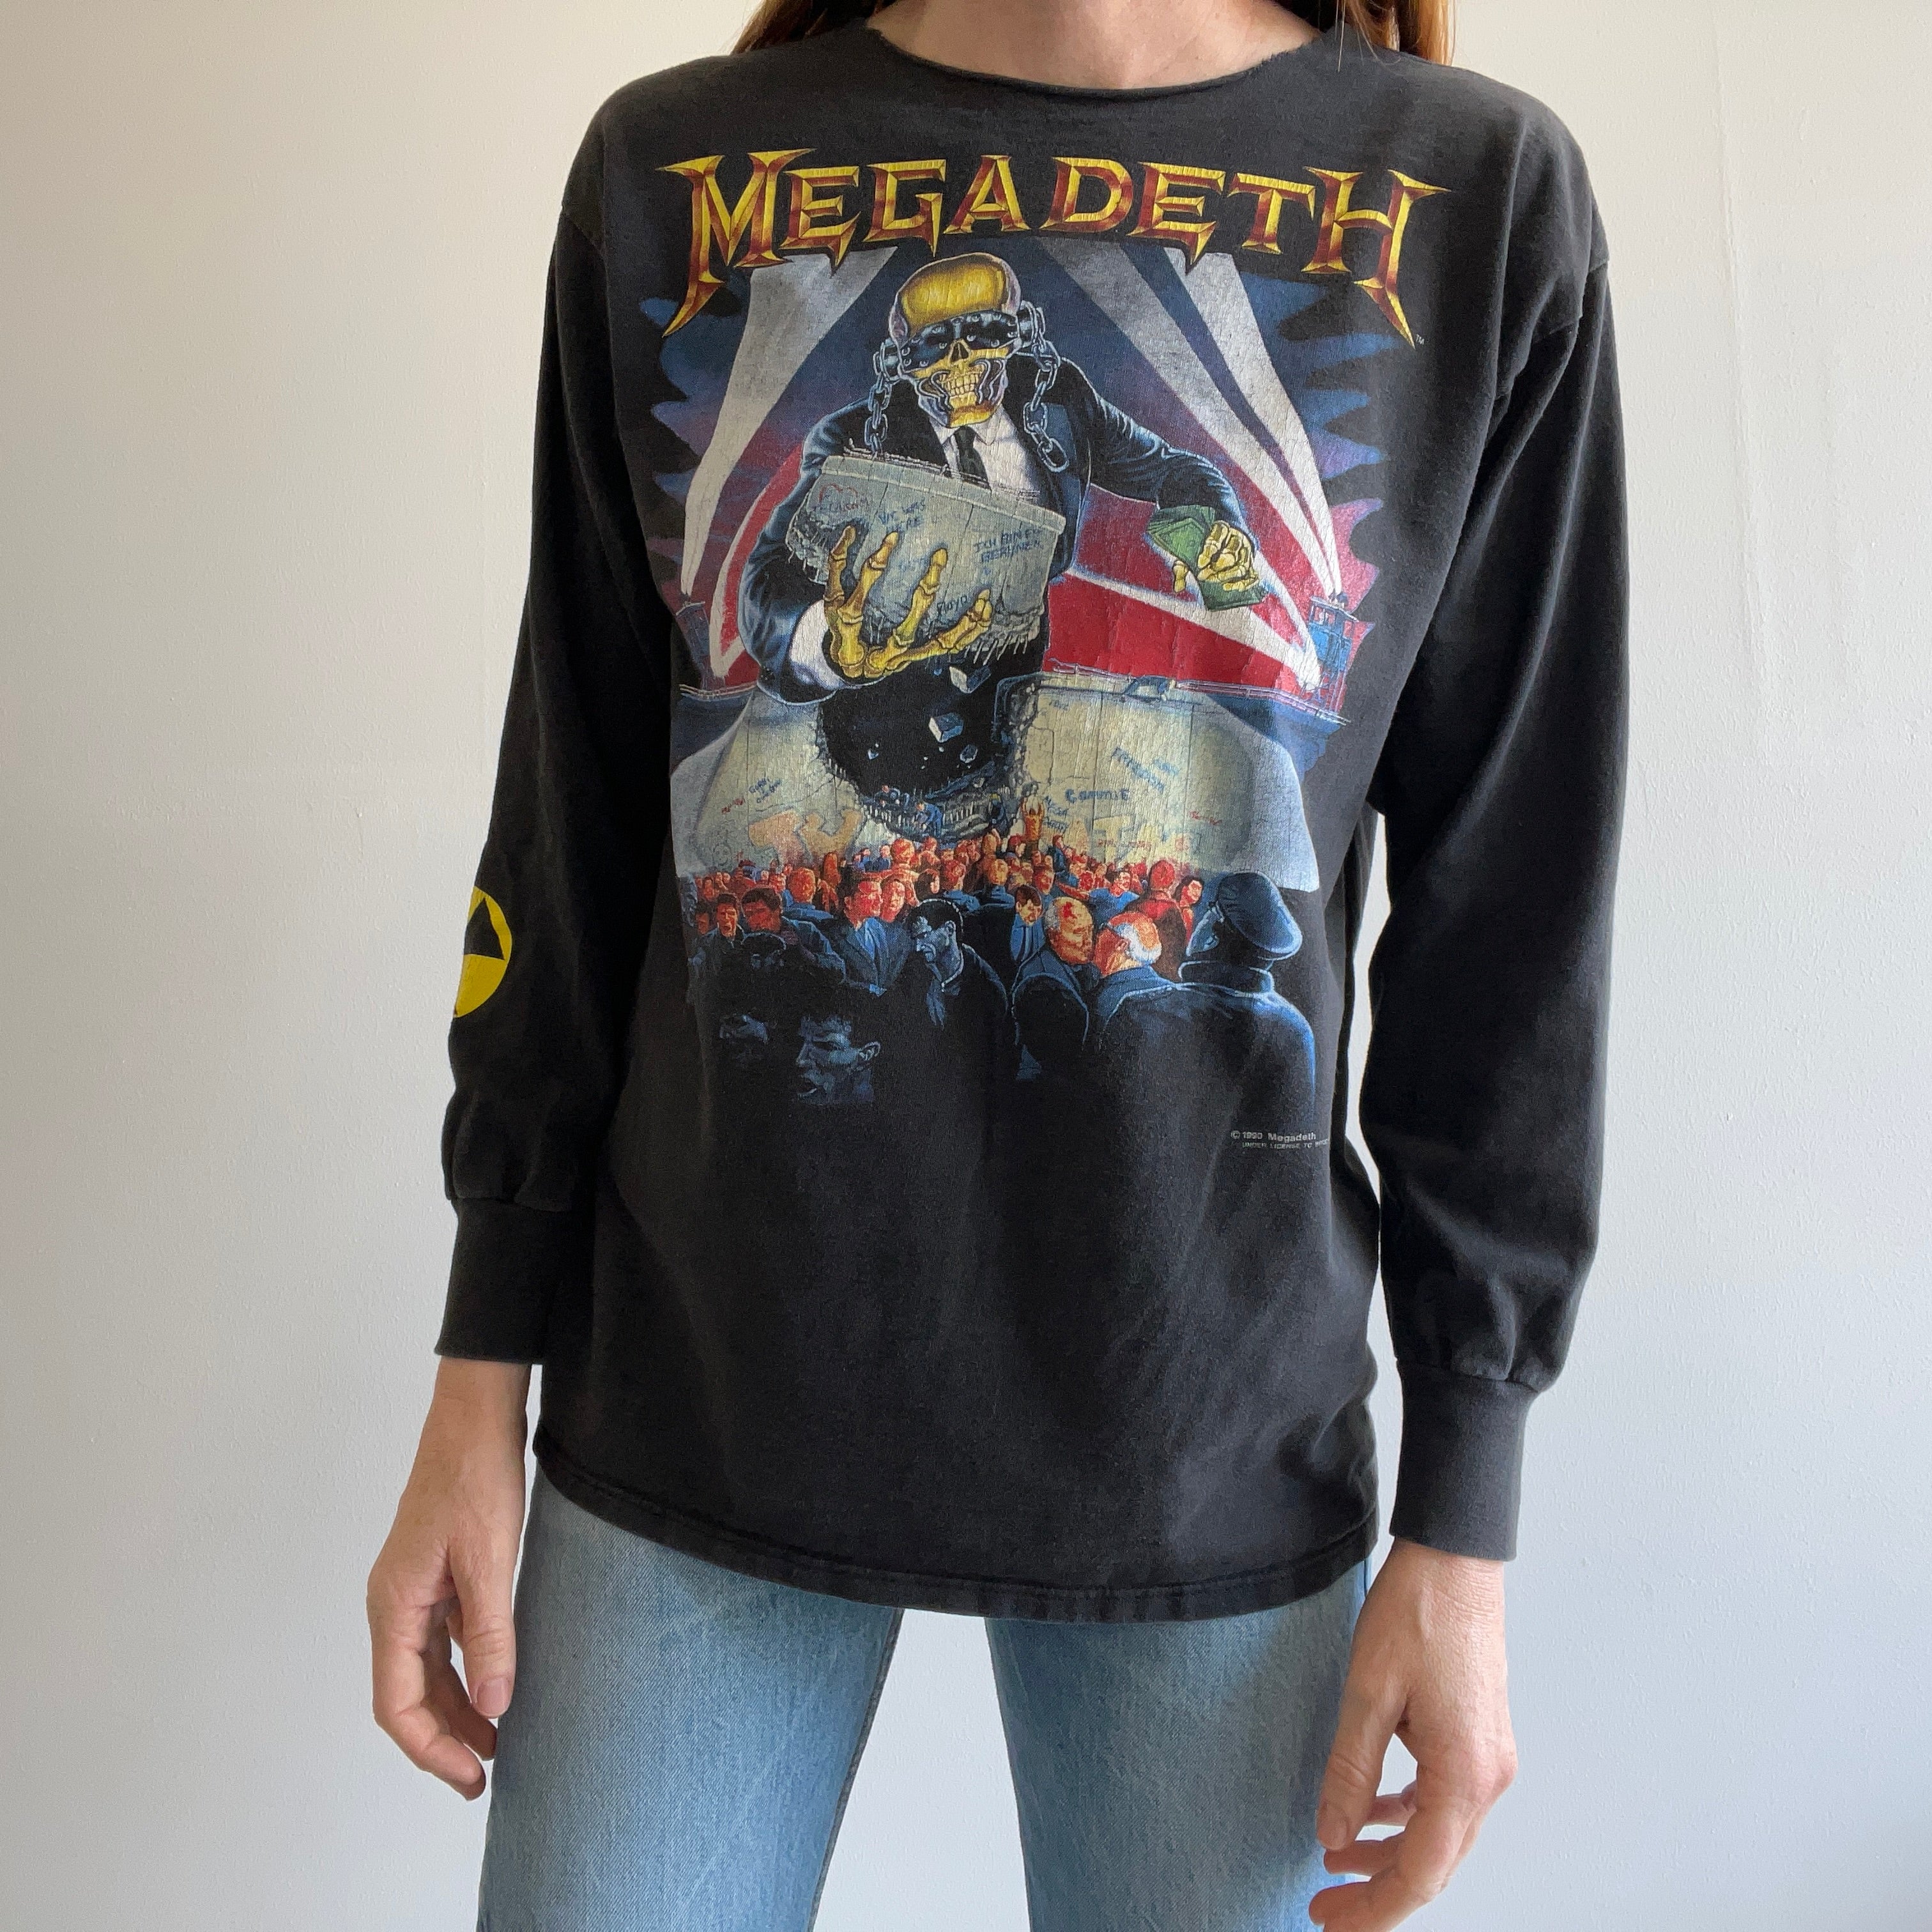 1990 Megadeath Band Long Sleeve T-shirt with Cut Neck by Brockum